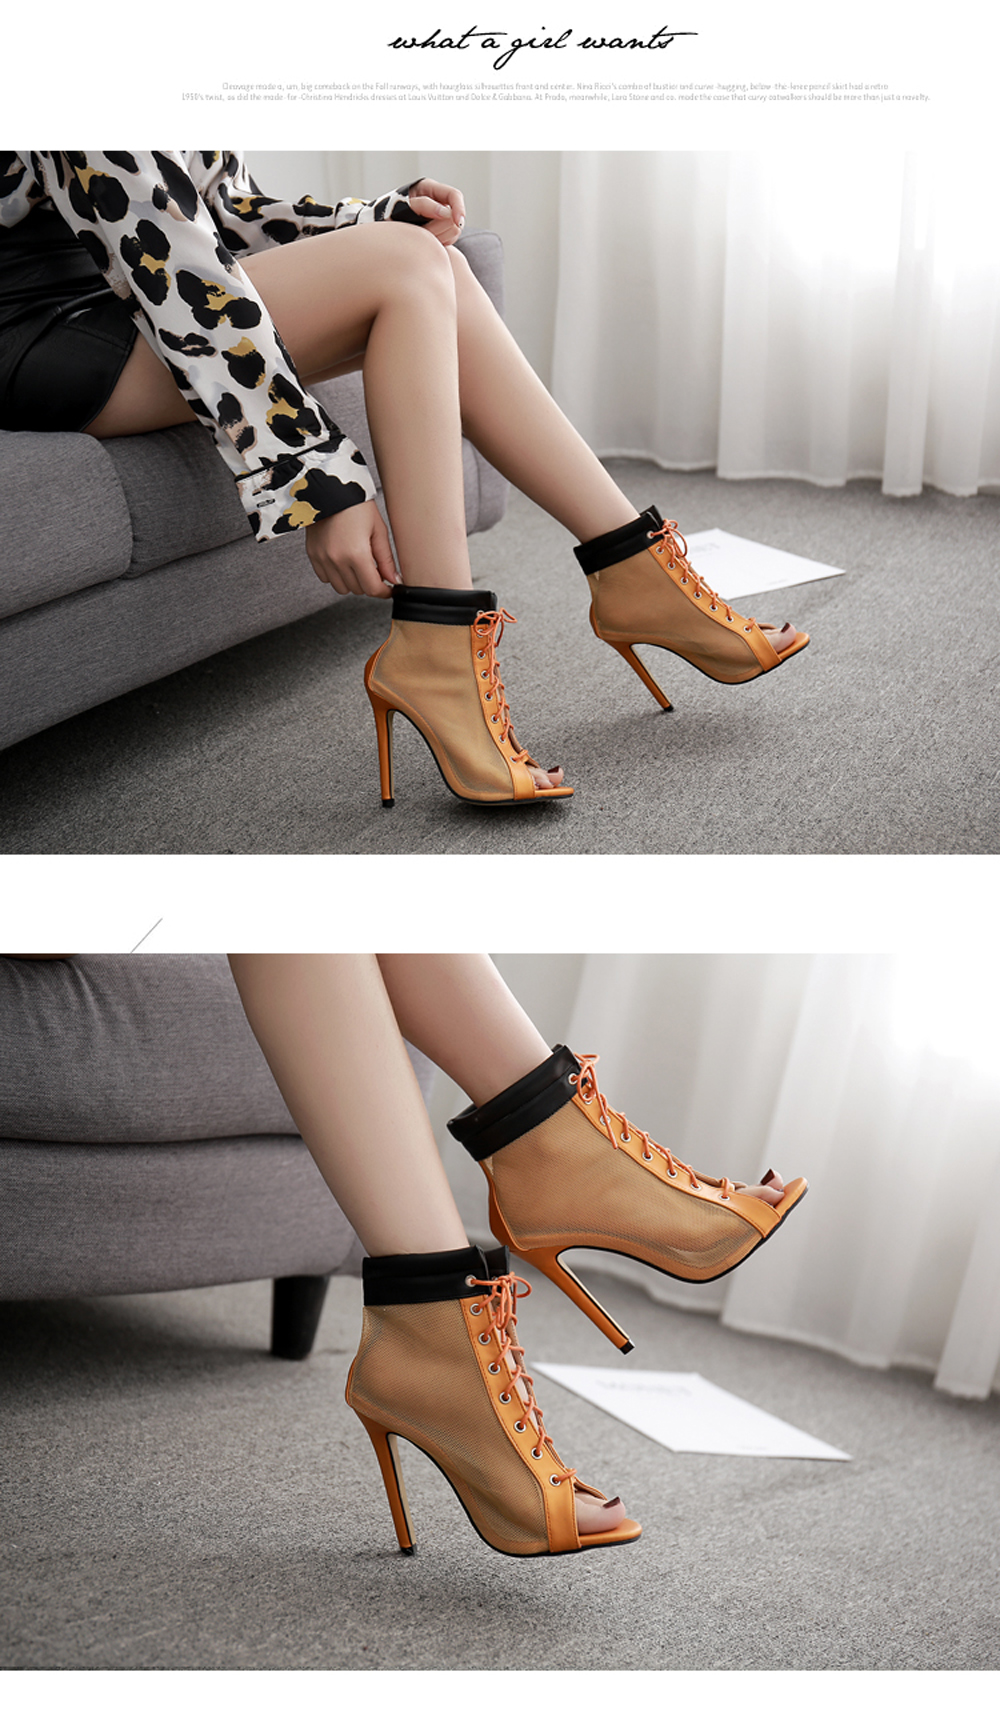 Women's Peep Toe Stiletto High Heels Japanese Sandals with Checkered